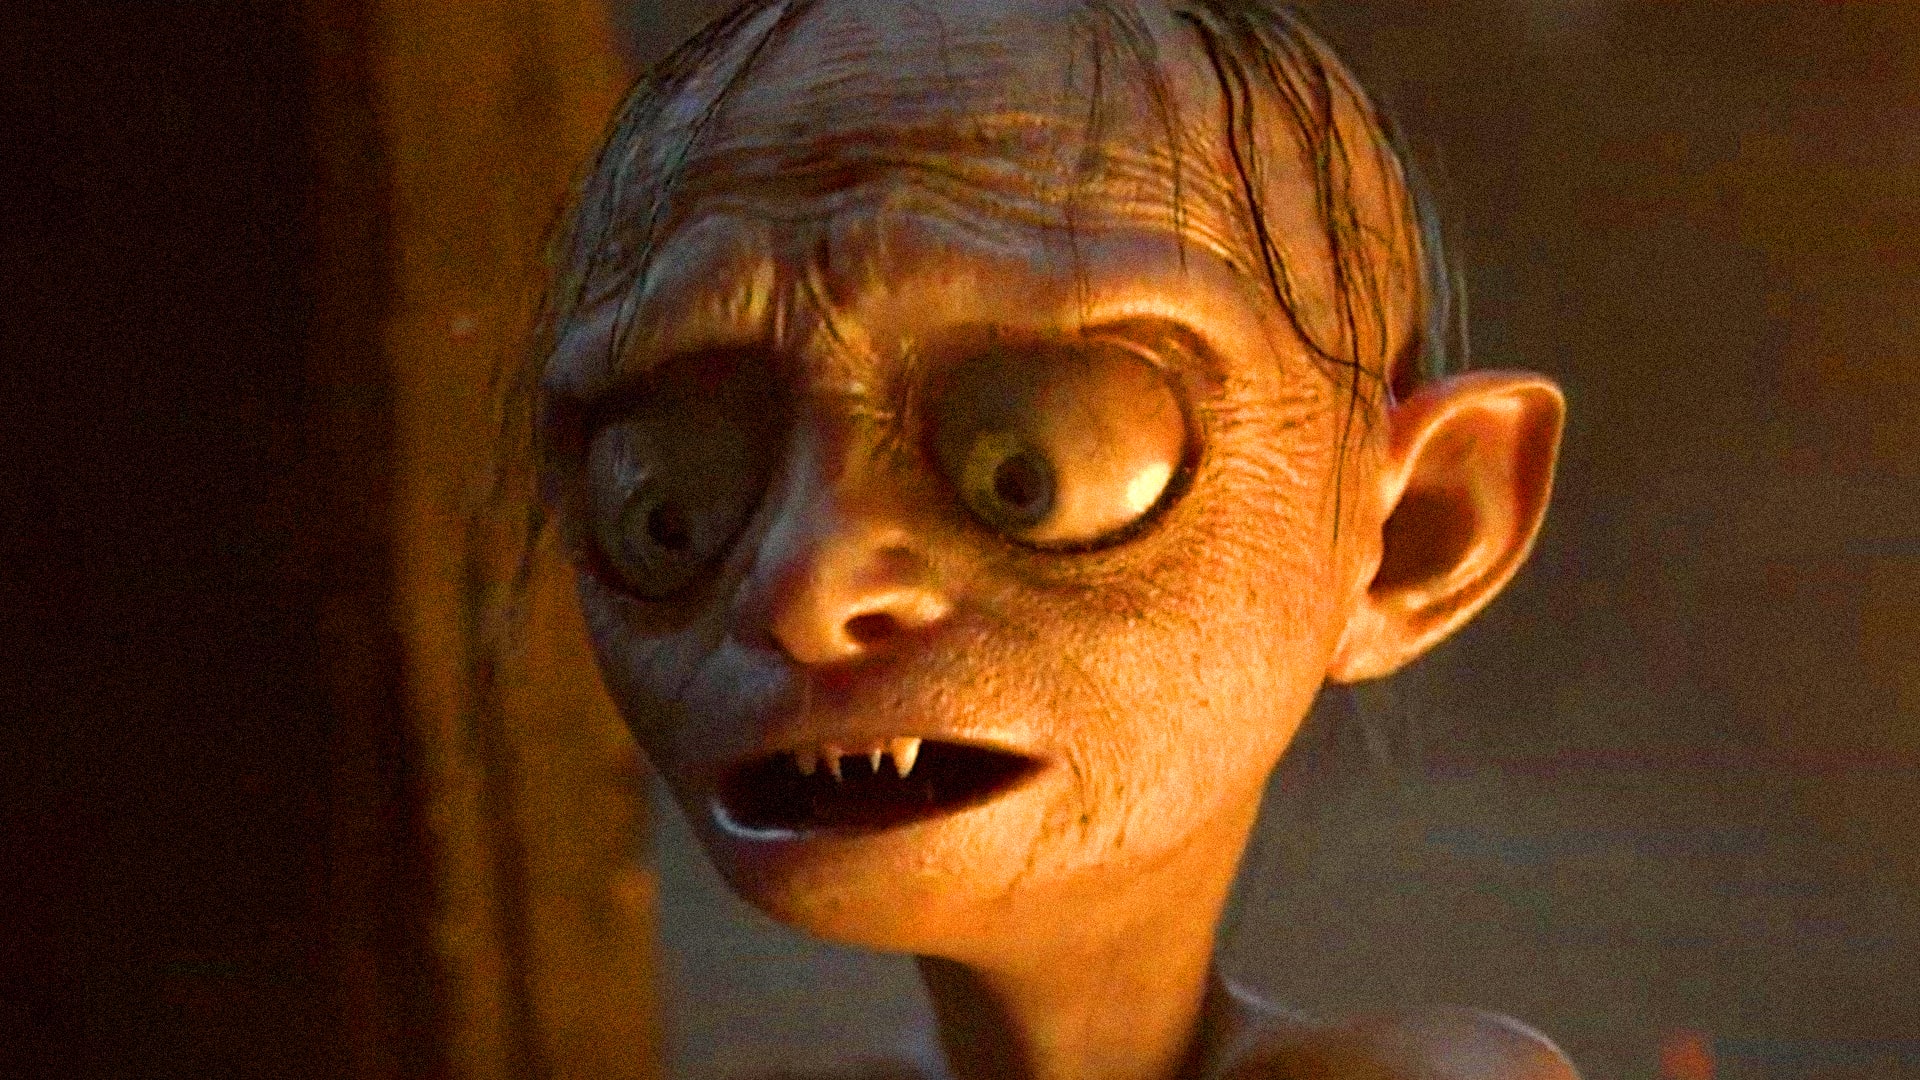 Lord of the Rings: Gollum Dev Apologizes For Underwhelming Game